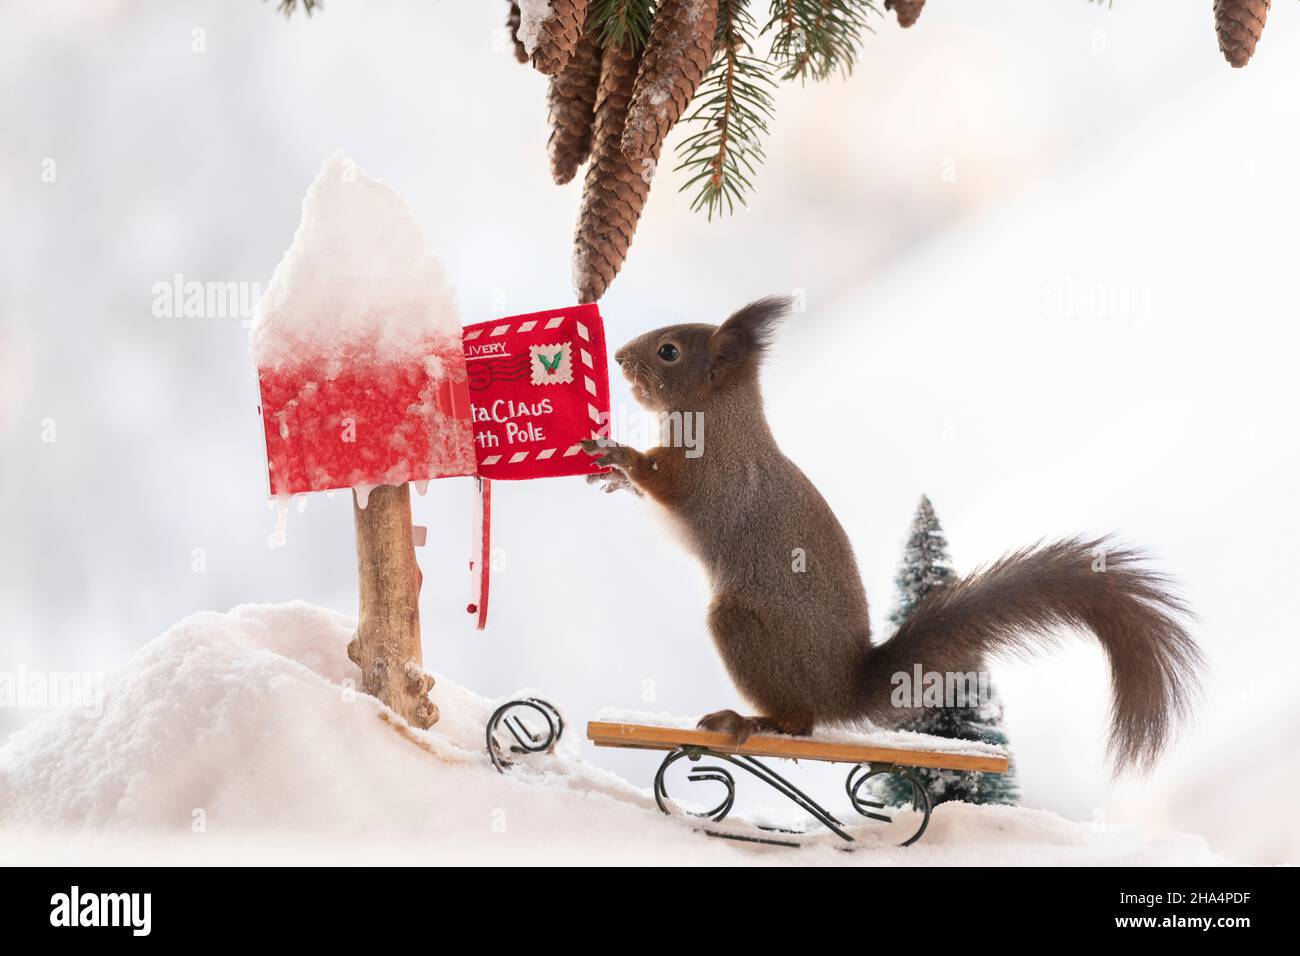 red squirrel,sciurus vulgaris is holding a letter in an letterbox on a sledge in snow Stock Photo